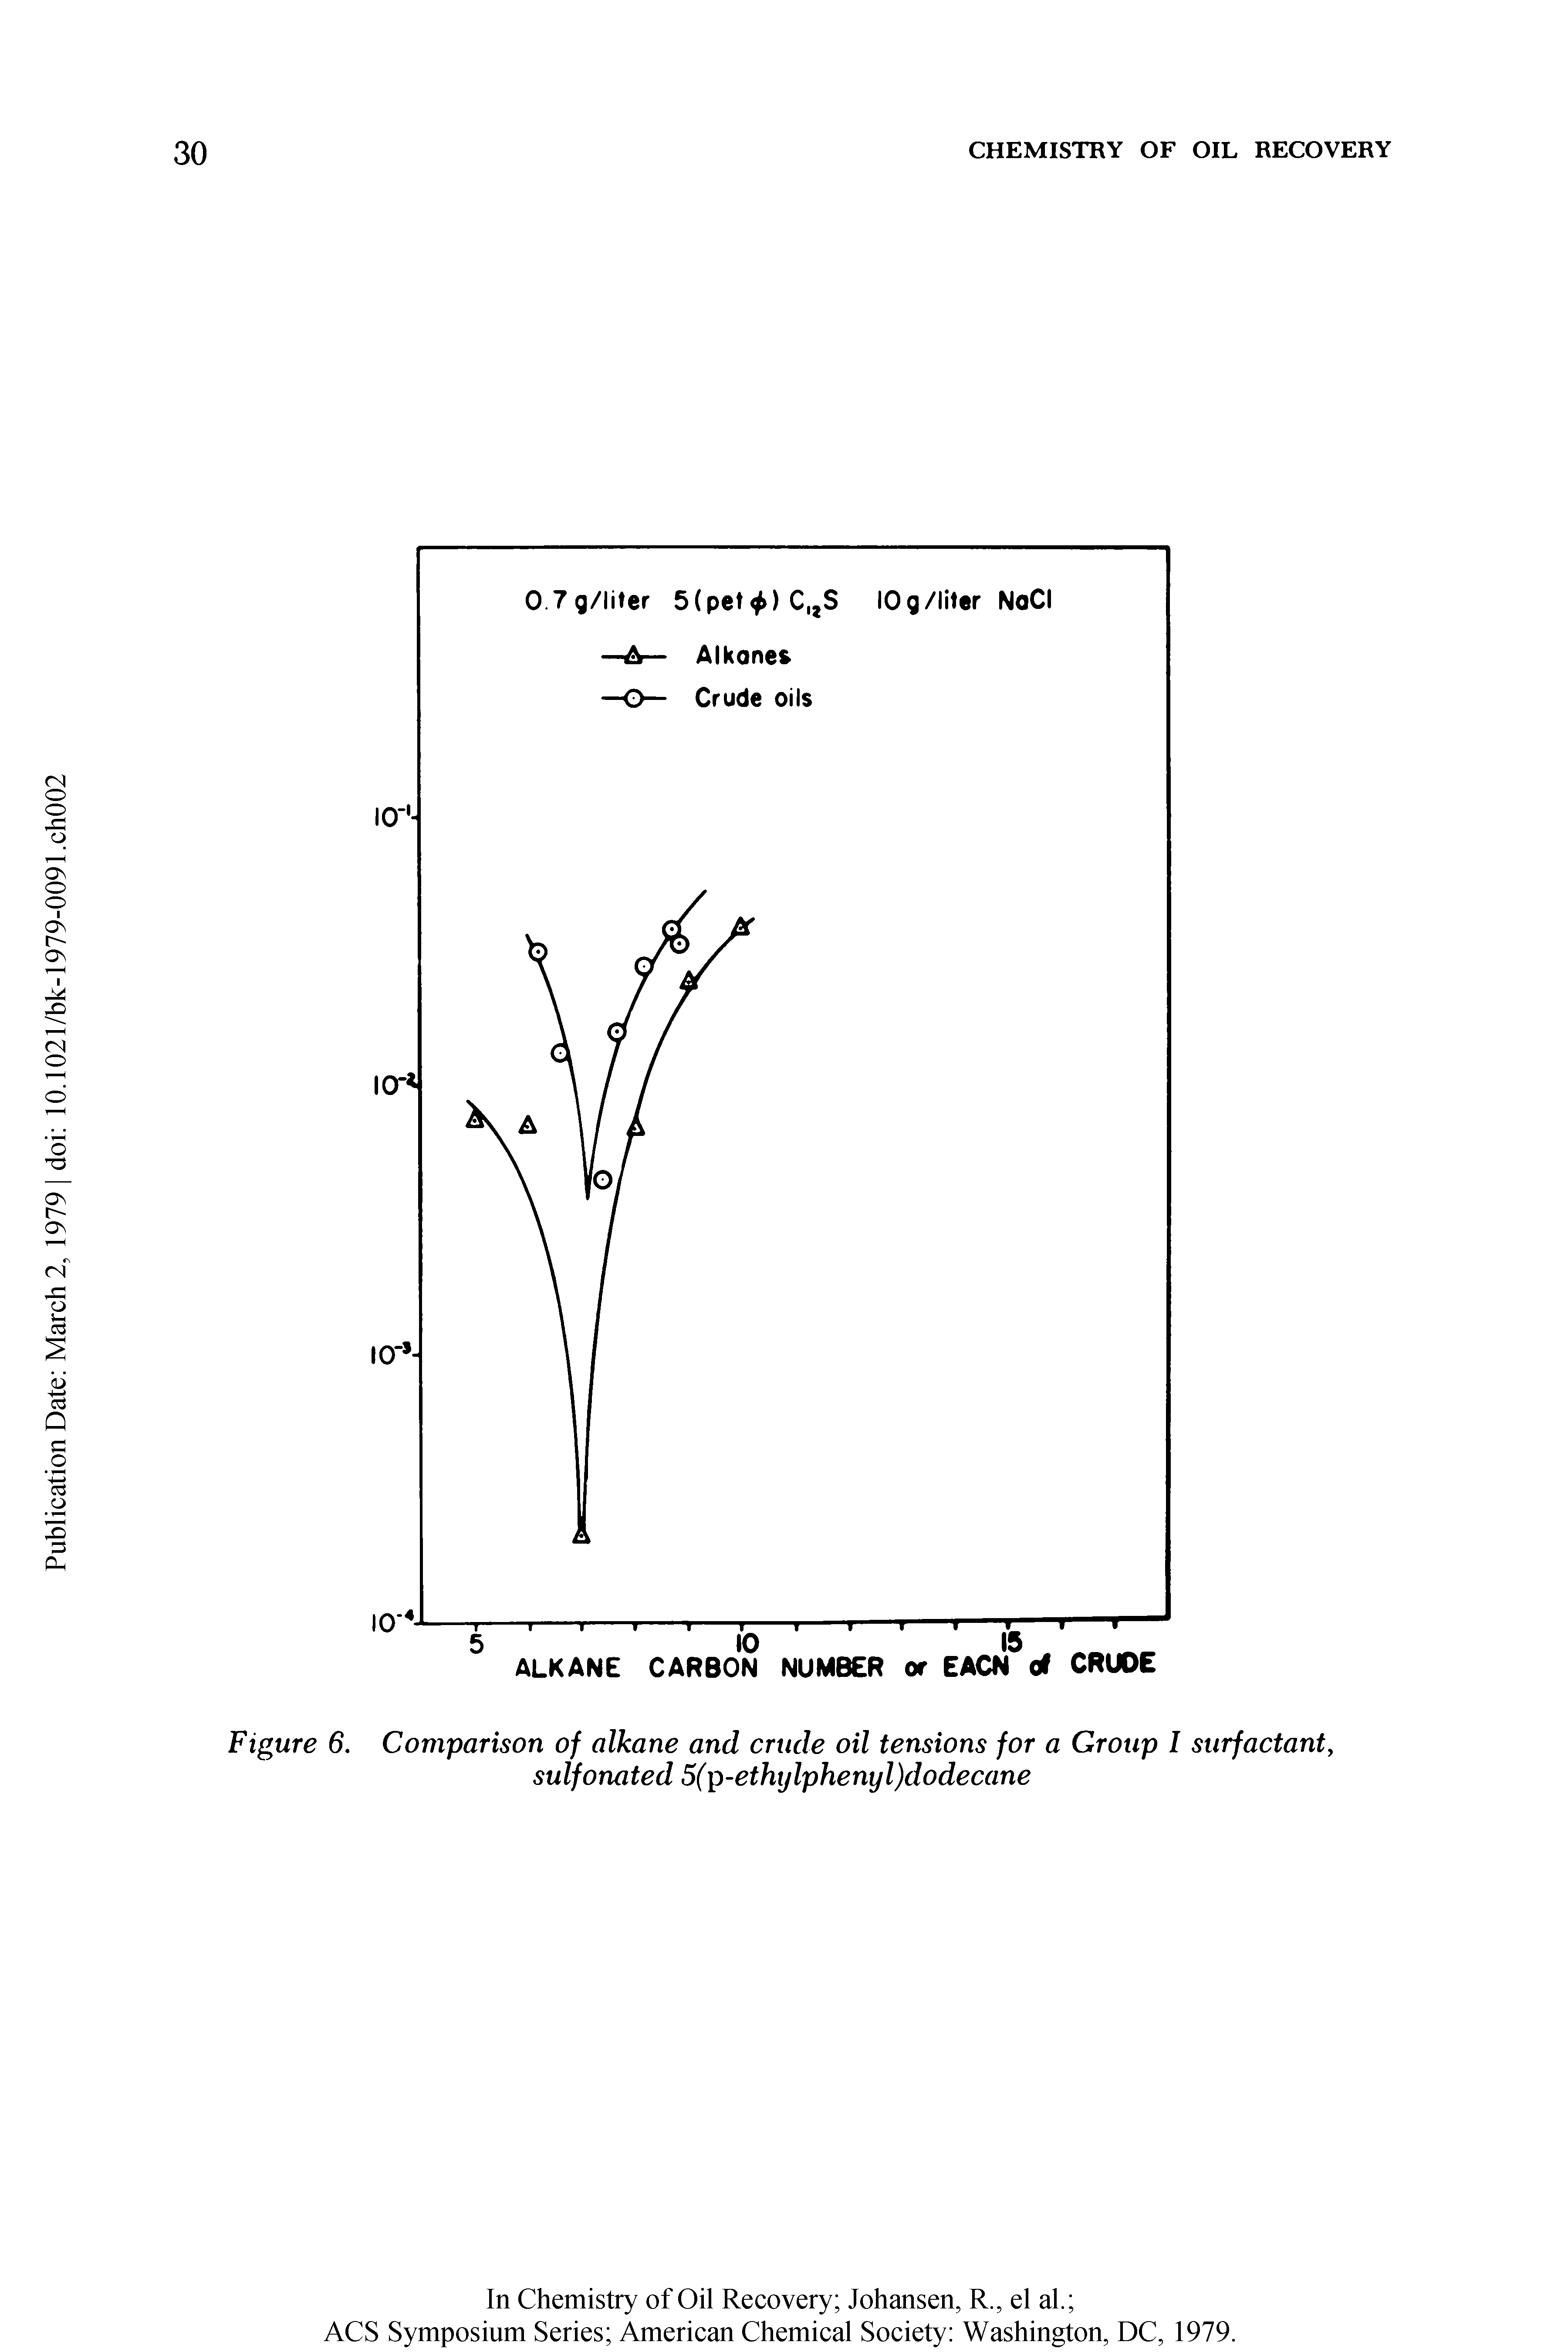 Figure 6. Comparison of alkane and crude oil tensions for a Group I surfactant, sulfonated 5(p-ethylphenyl)dodecane...